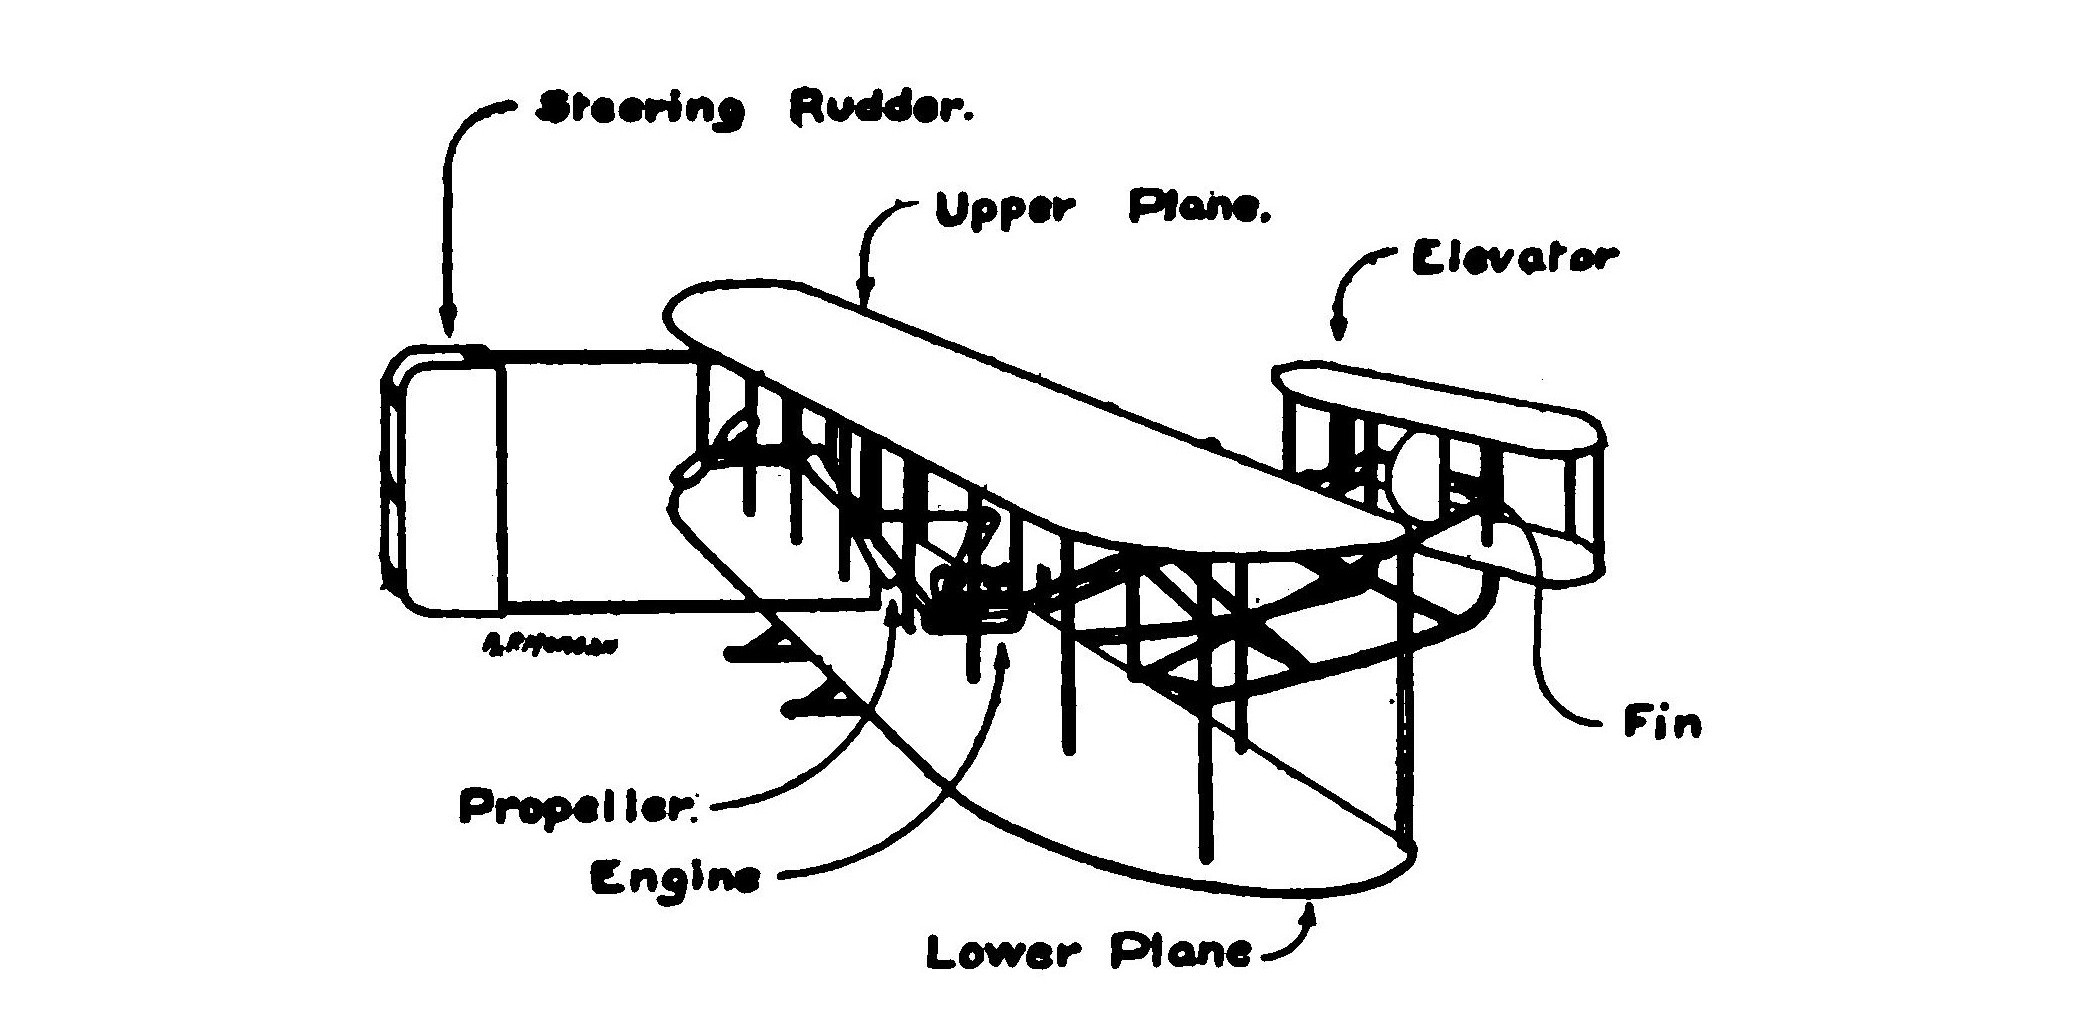 FIG 3. Diagram showing the makeup of a biplane (Wright).